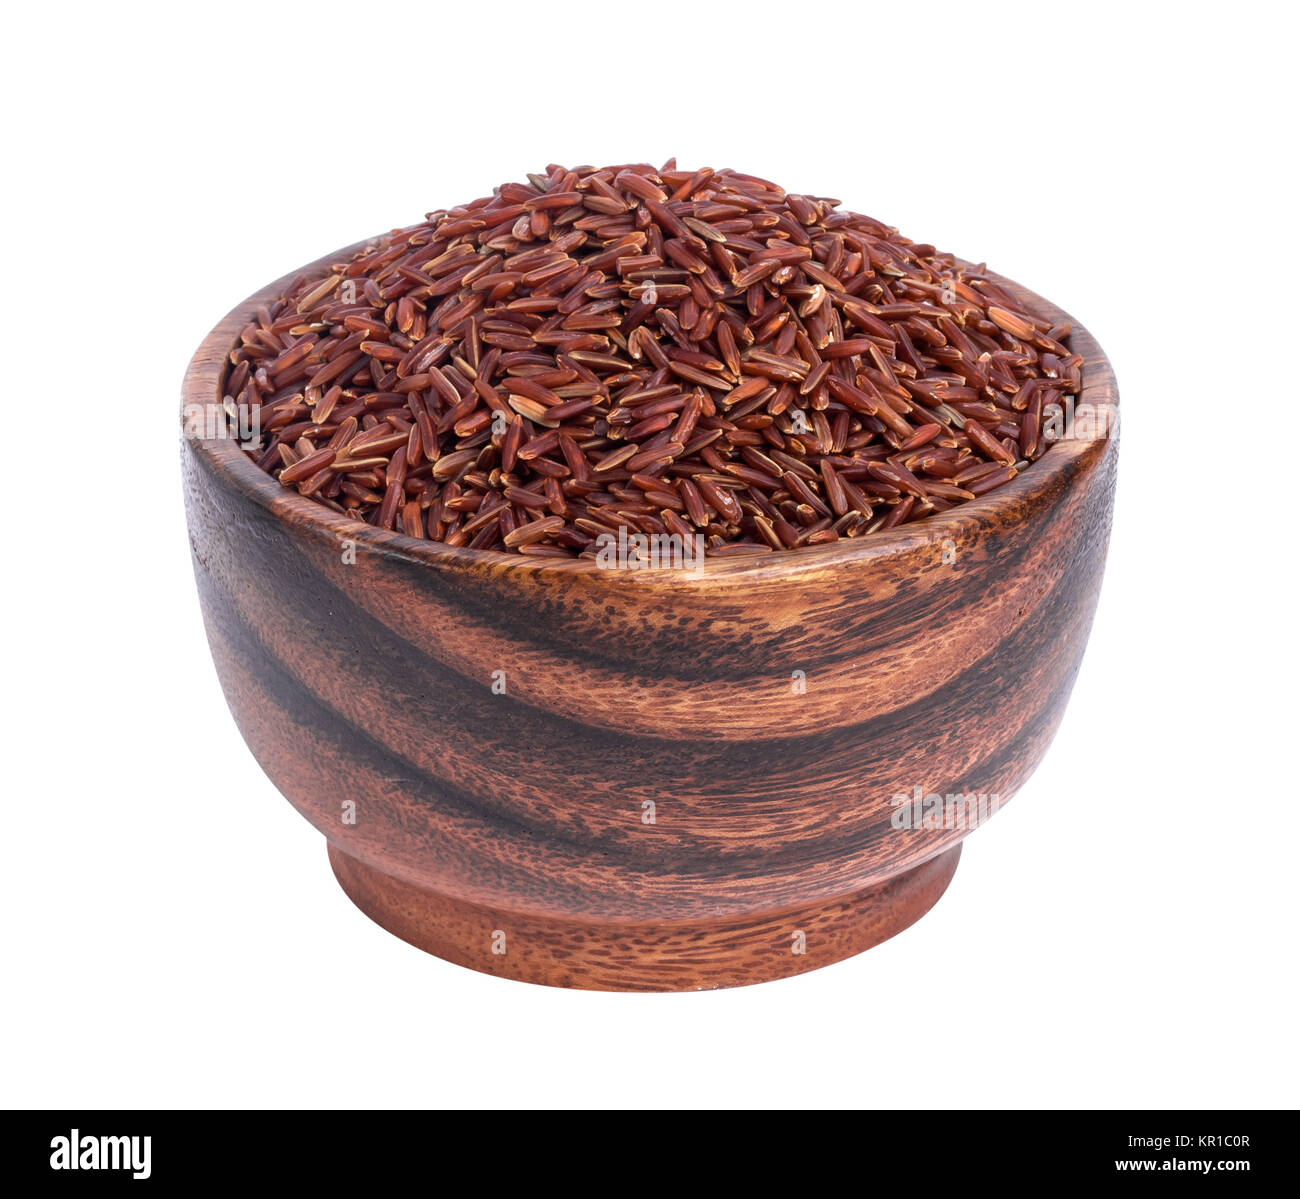 Red rice groats in wooden bowl isolated on white background Stock Photo